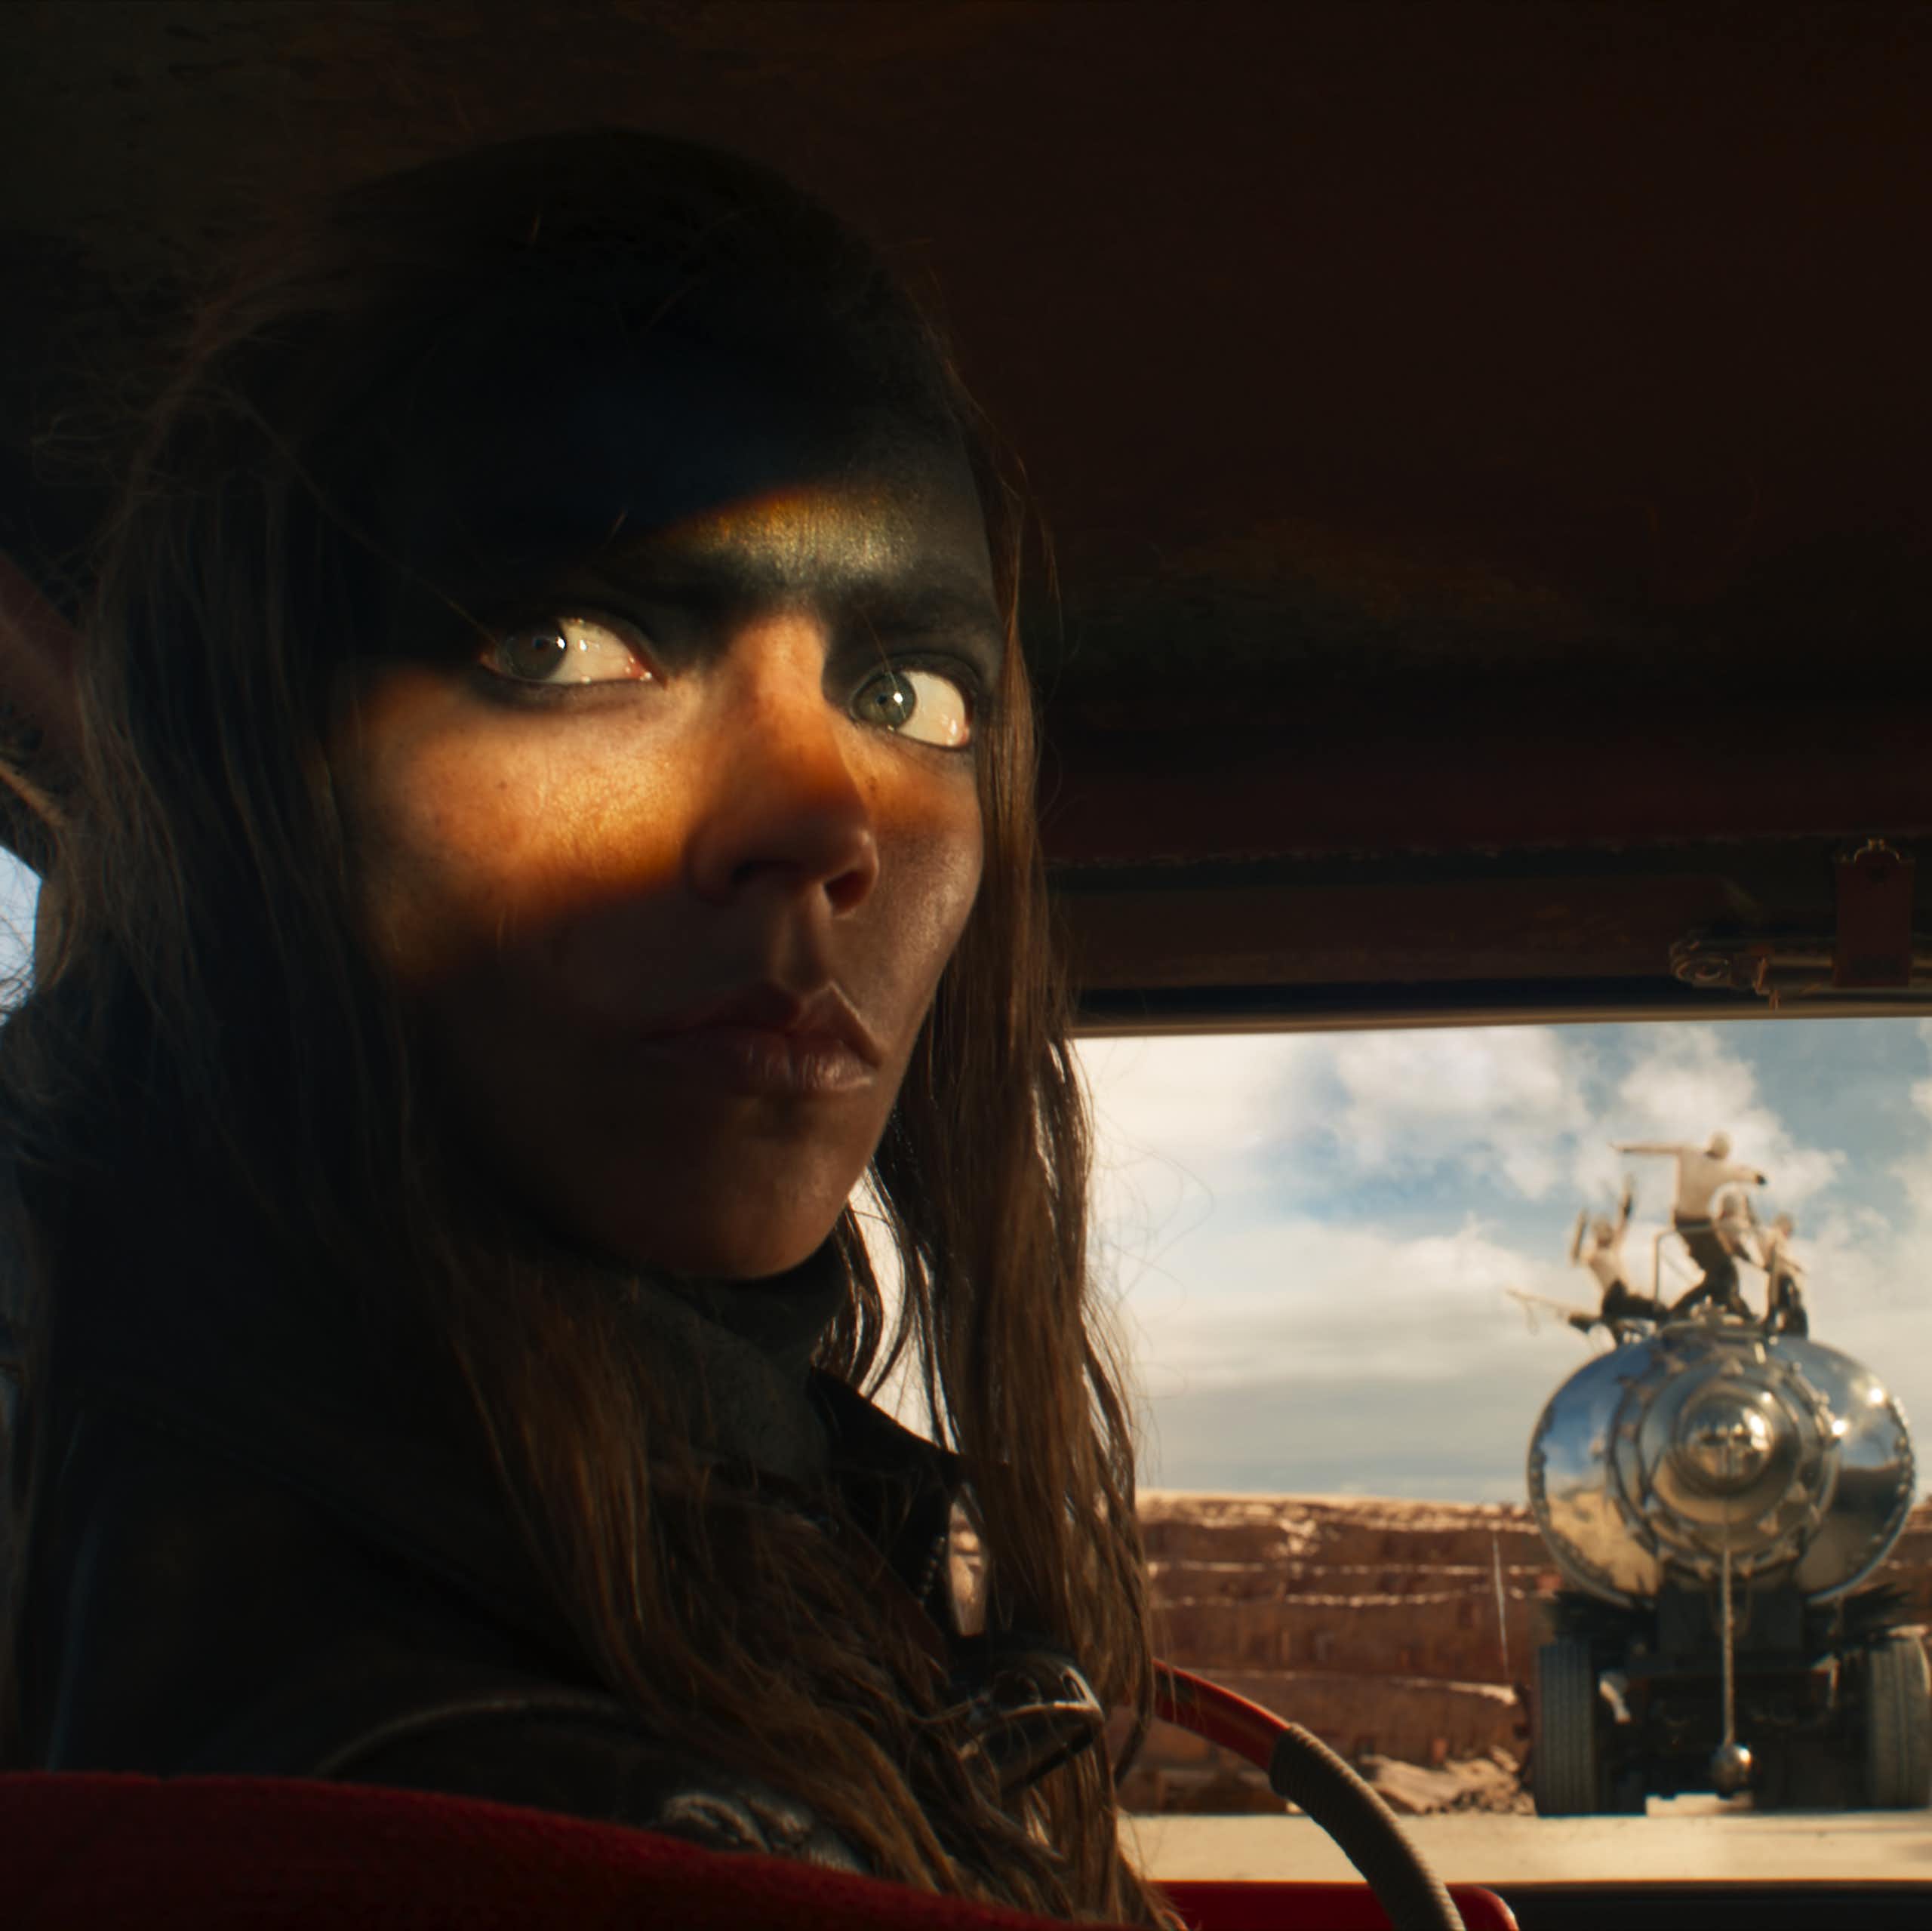 A still from the movie featuring lead actress in a truck cab.